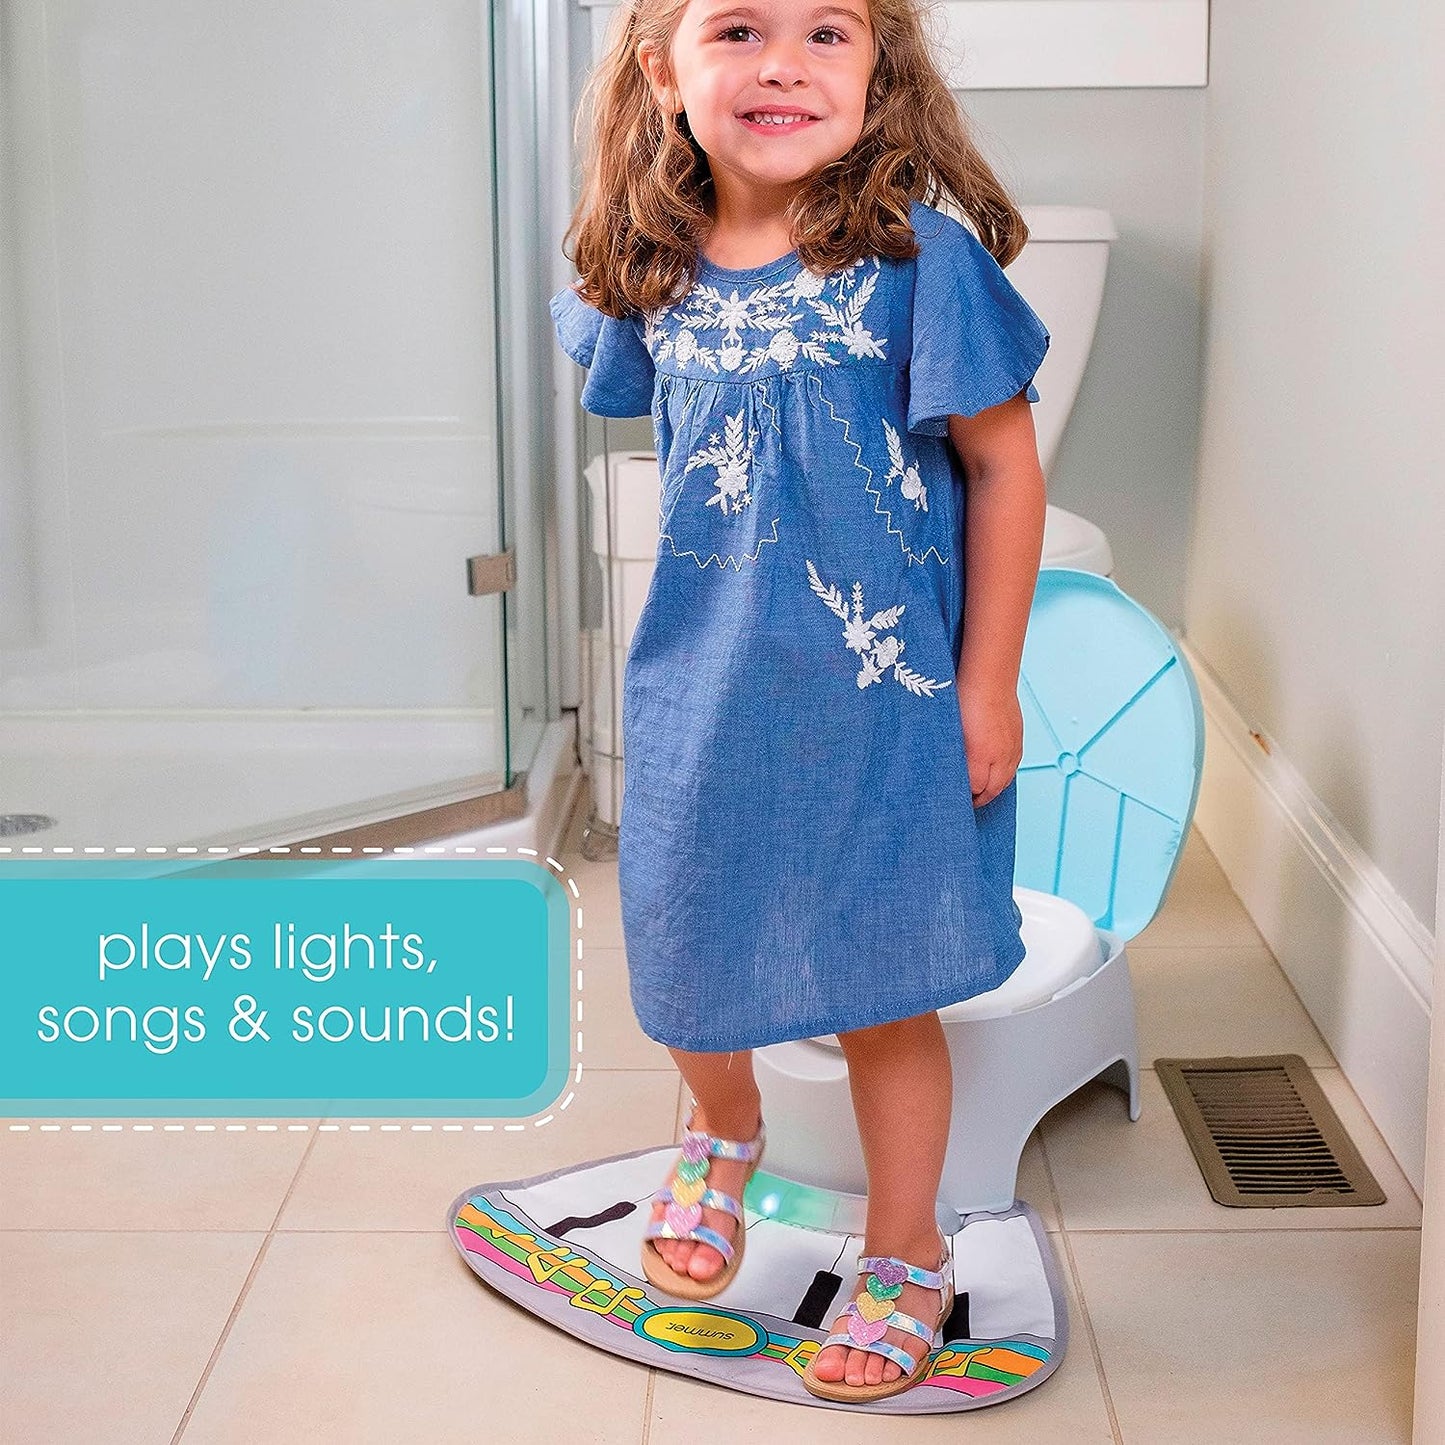 Summer Infant My Size Potty Lights and Songs Transitions,White Realistic Potty Training Toilet with Interactive Handle that Plays Music for Kids,Removable Potty Topper/Pot,Wipe Compartment,SplashGuard